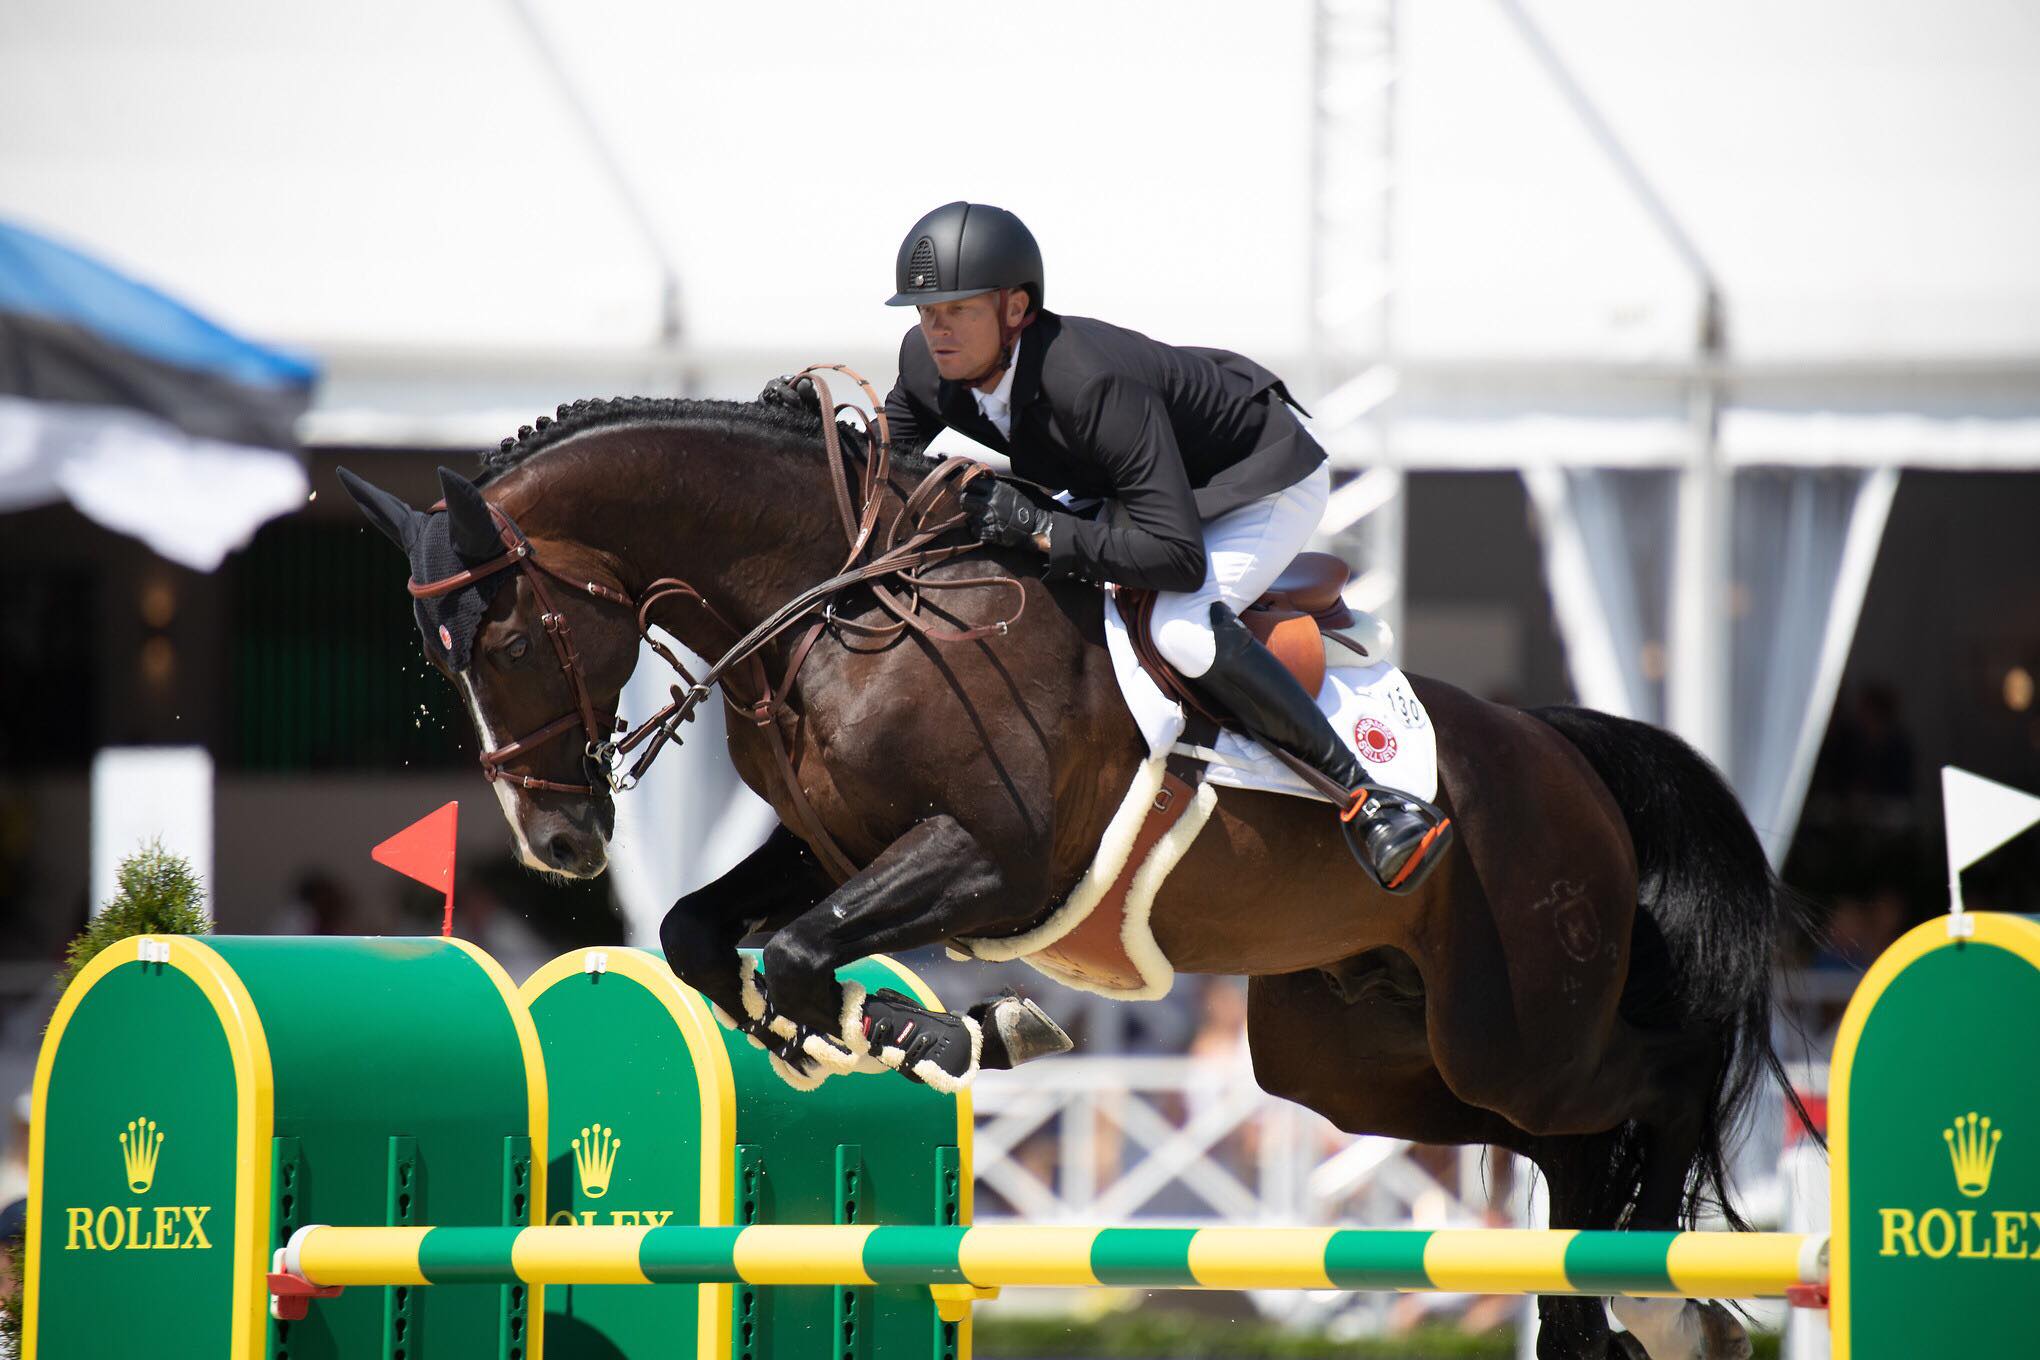 Guery wins CSI5* Grand Prix of Knokke in front of homeaudience